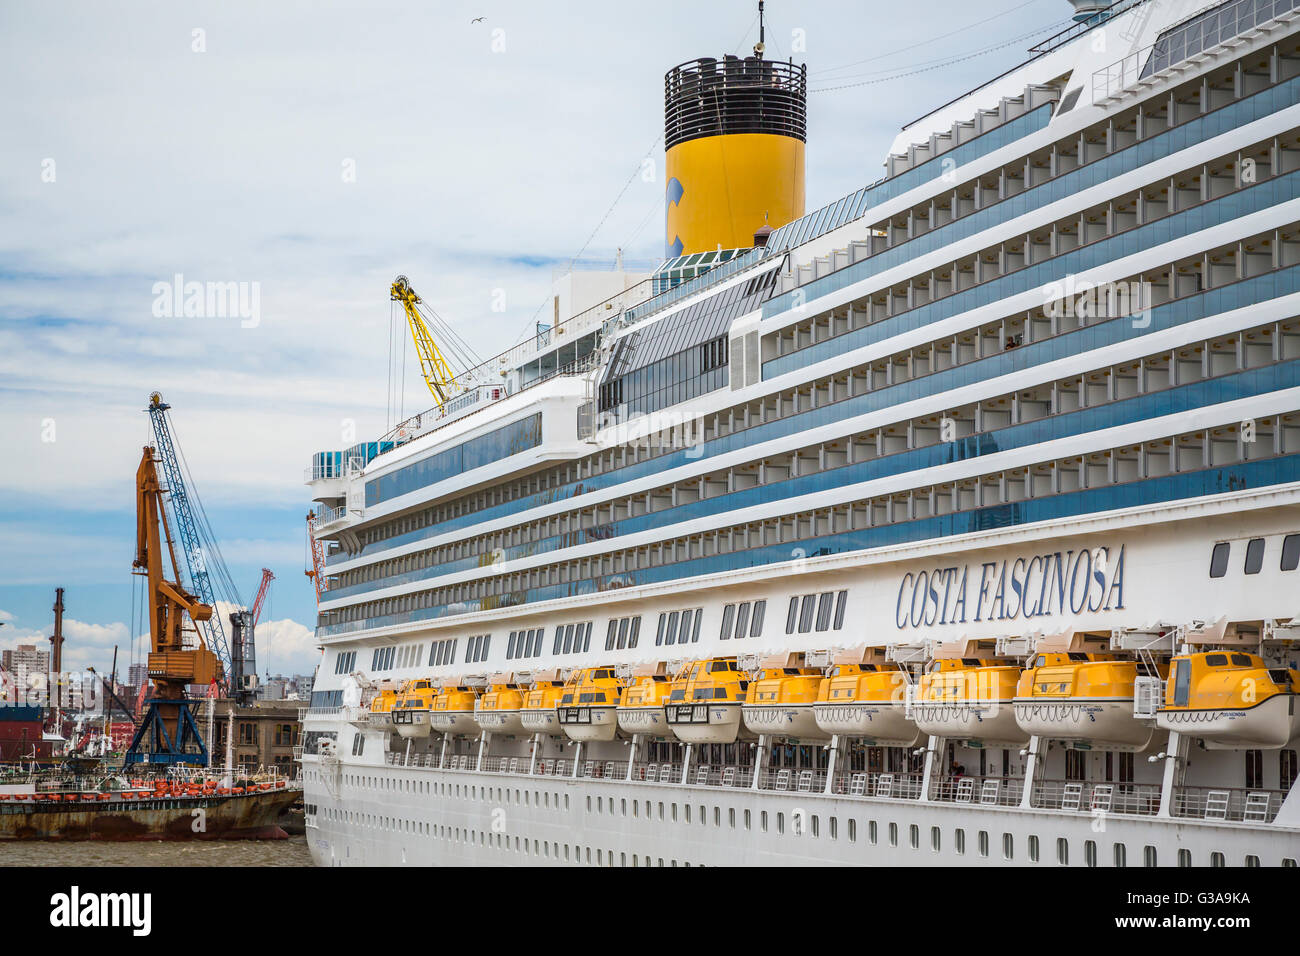 The cruise ship Costa Fascinosa in the port in Montevideo, Uruguay, South America. Stock Photo